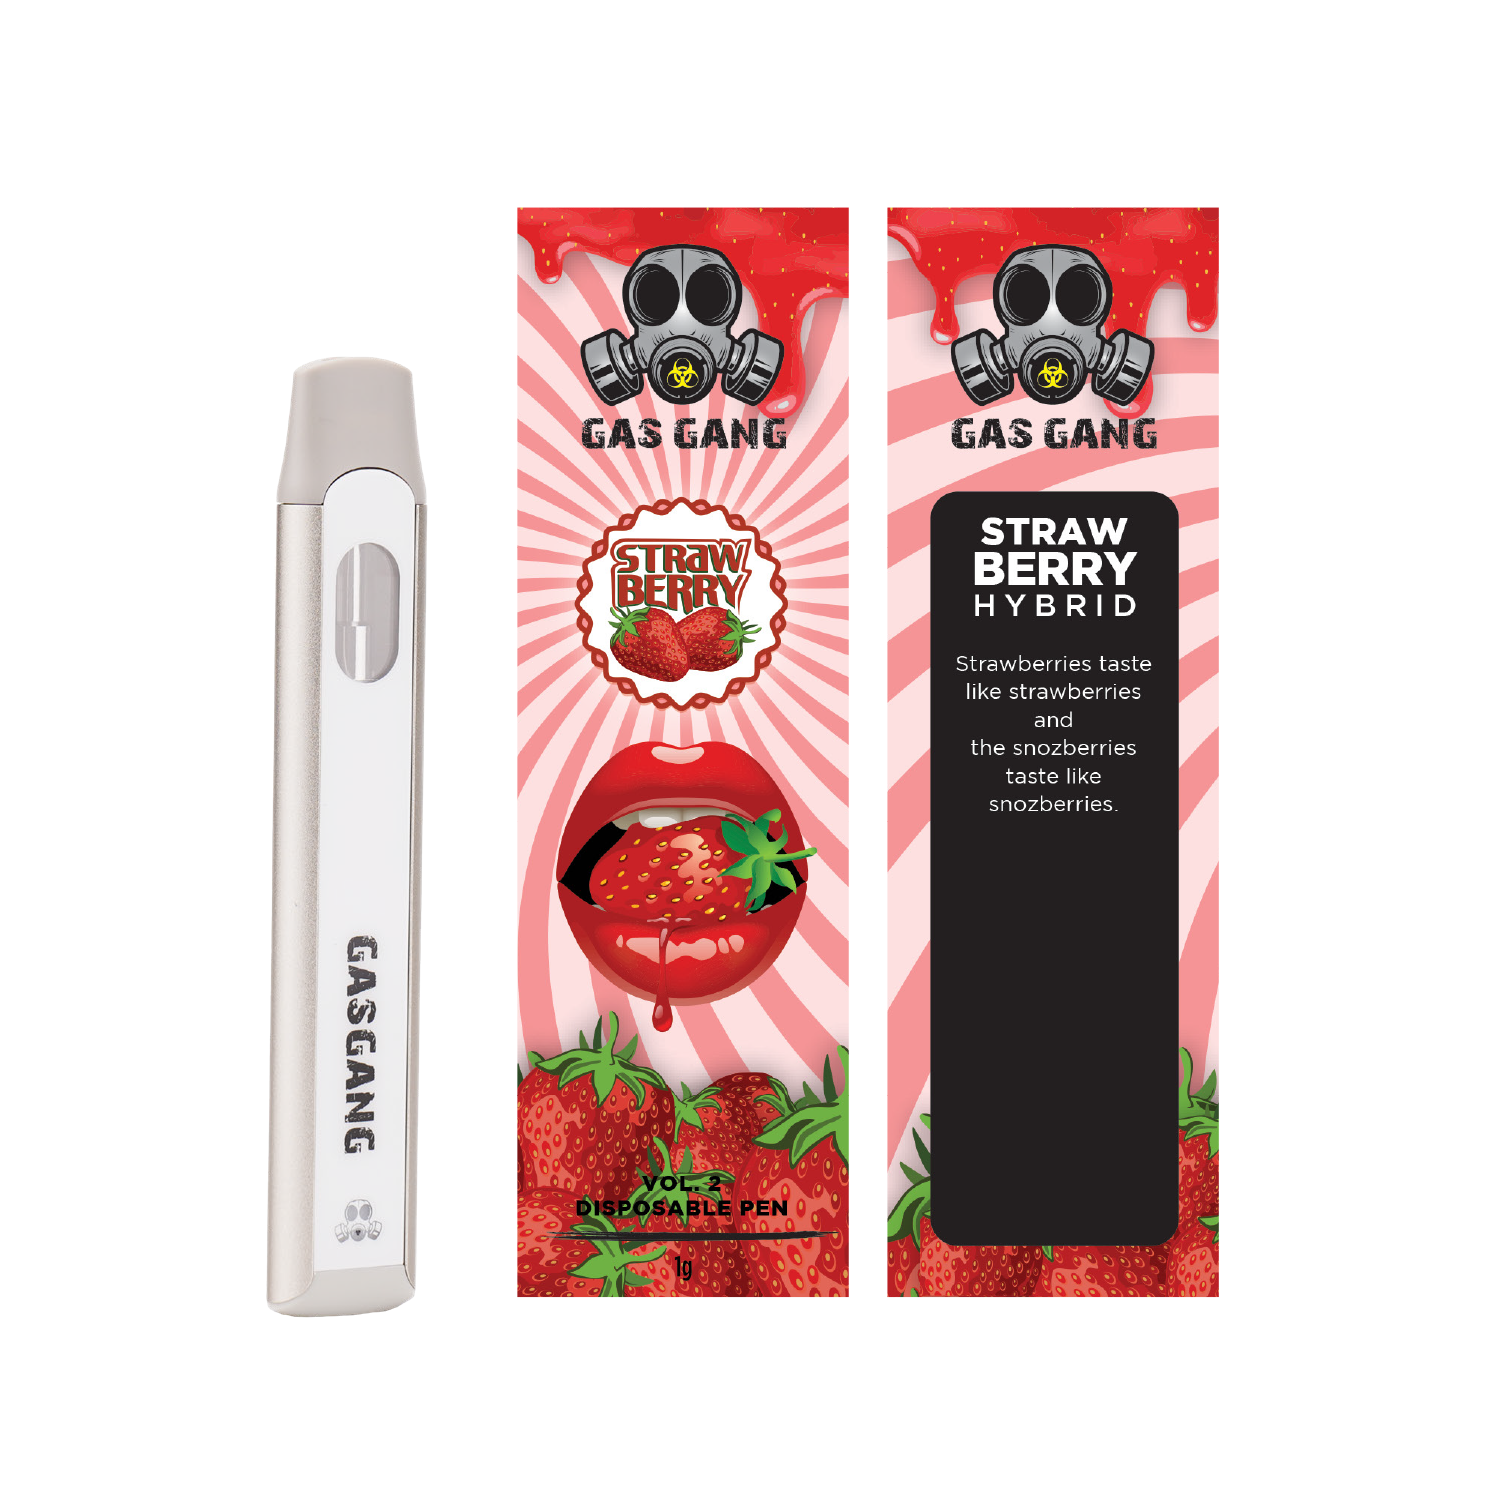 Buy Gas Gang - Strawberry Disposable Pen at BudExpressNOW Online Shop.